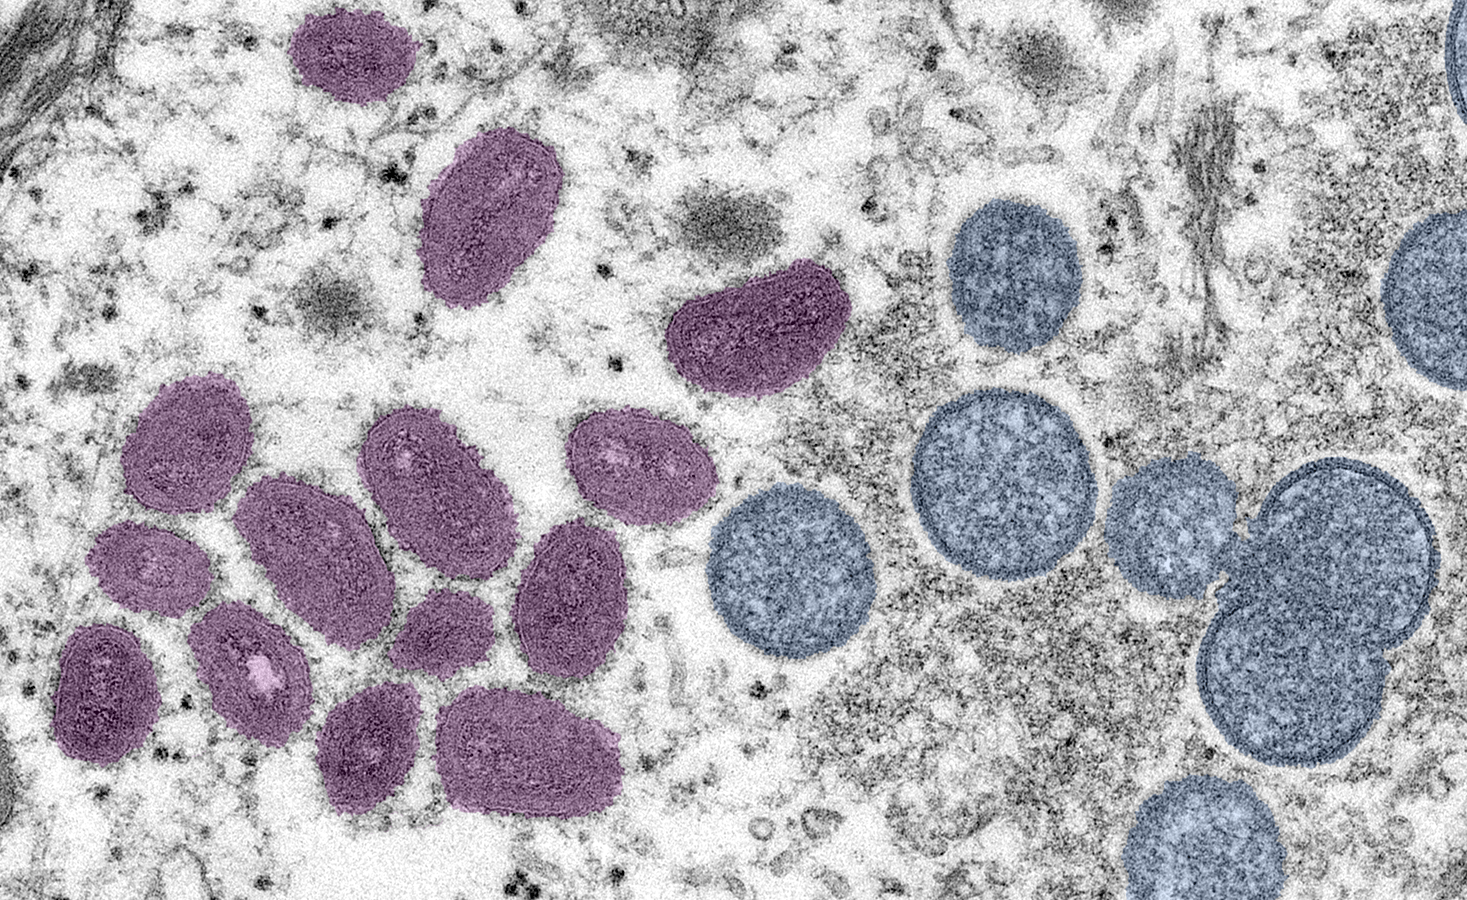 a microscopic image of monkeypox cells. they are artificially colored in two groups, purple and blue